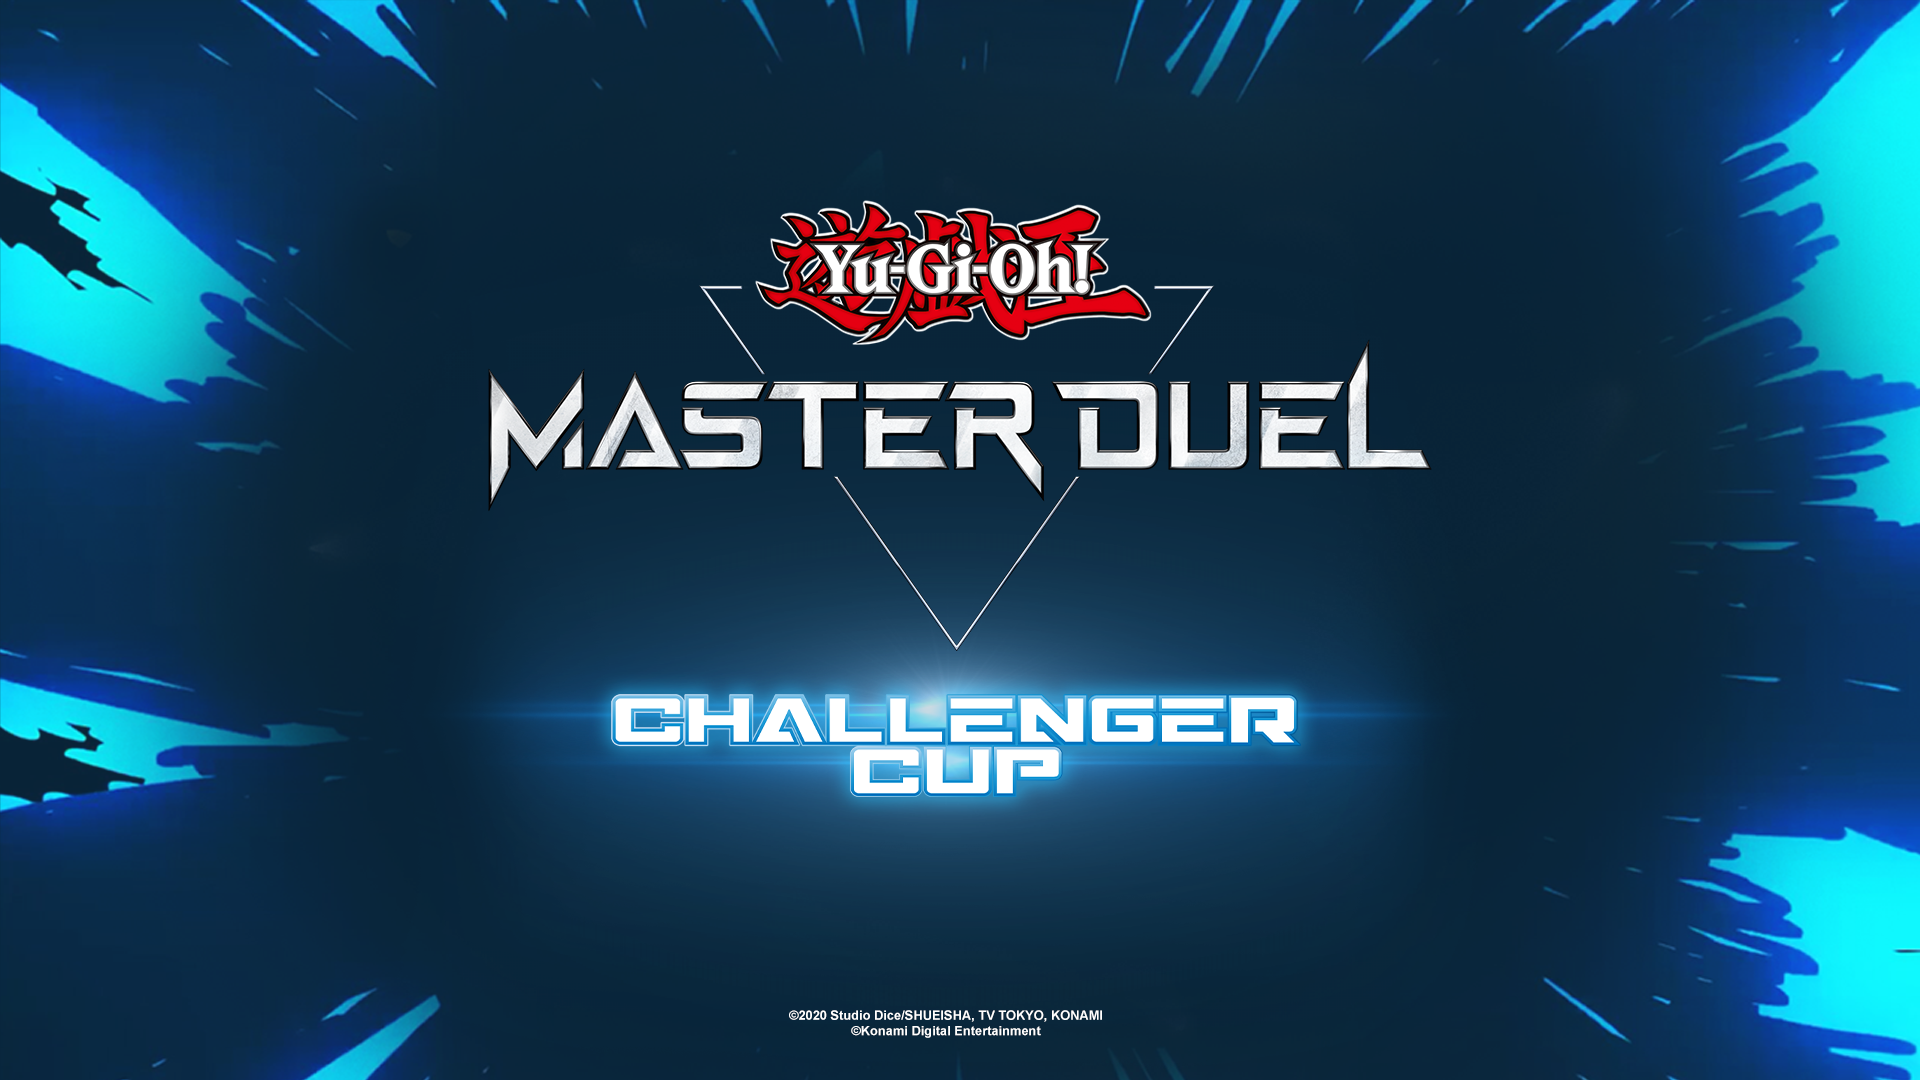 Yu-Gi-Oh! MASTER DUEL presenta il torneo europeo Challenger Cup